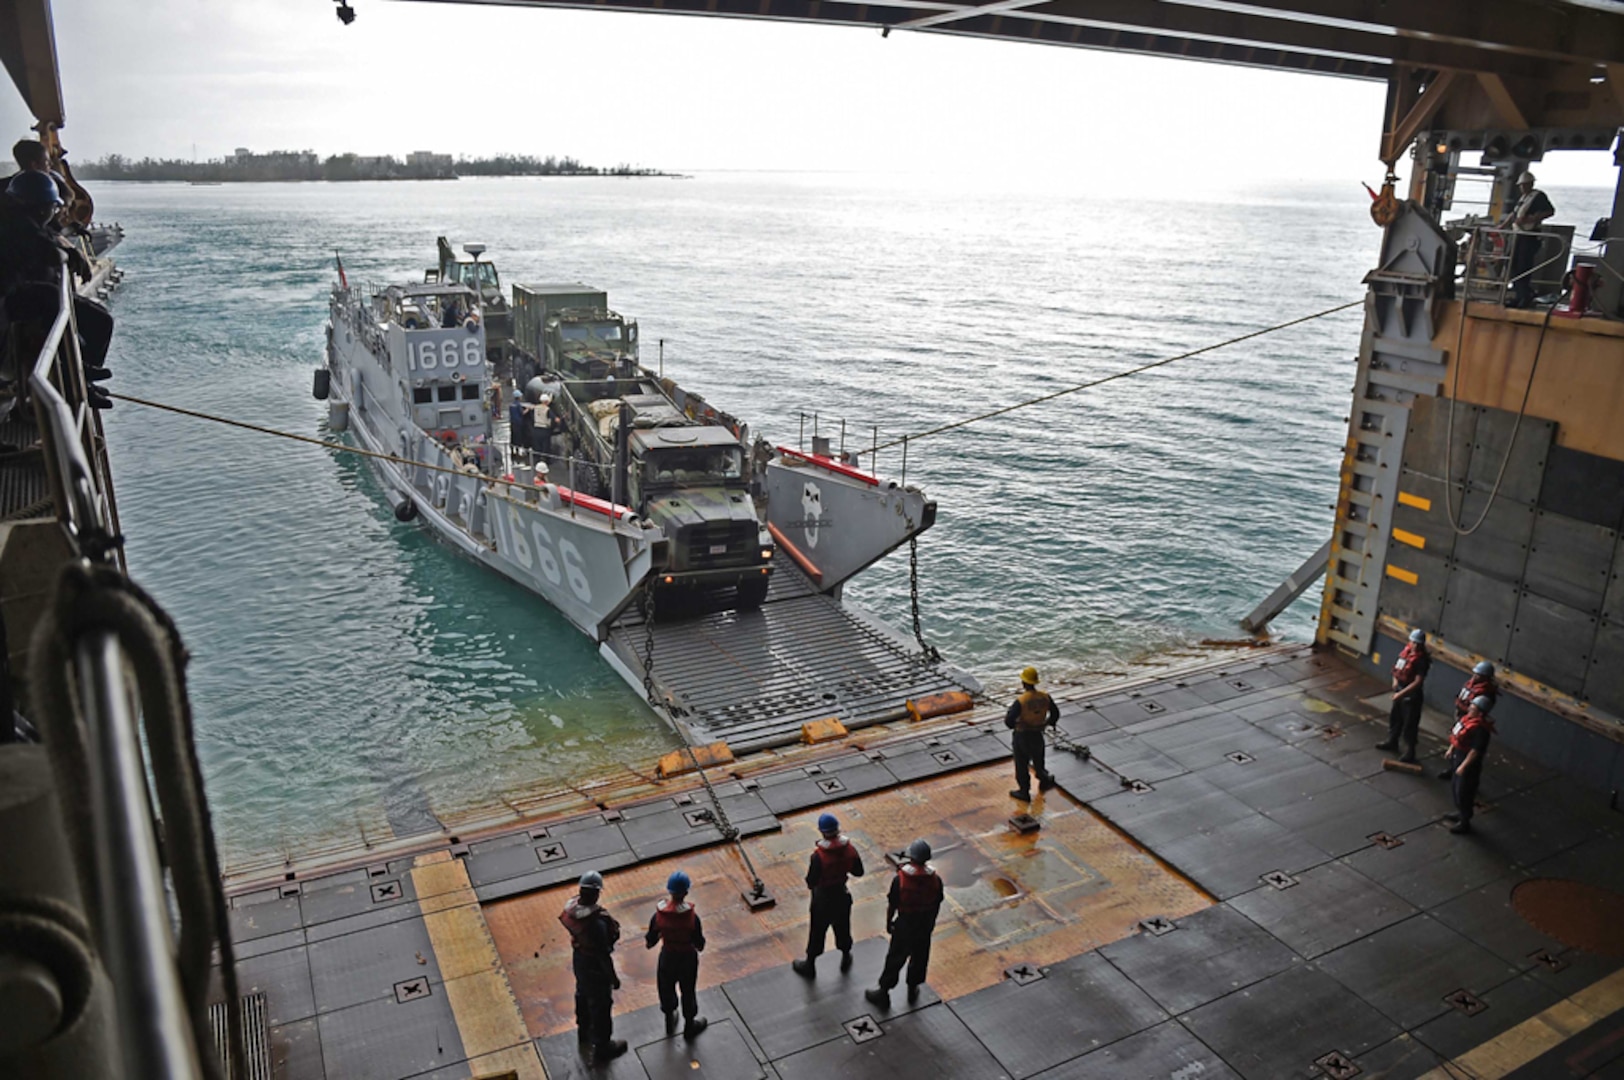 SAIPAN HARBOR, Saipan (August 8, 2015) - Vehicles from the 31st Marine Expeditionary Unit (MEU) are unloaded from the well deck of the amphibious dock landing ship USS Ashland (LSD 48) via Landing Craft Utility vehicle during disaster relief efforts in Saipan after Typhoon Soudelor made landfall. Ashland is assigned to the Bonhomme Richard Expeditionary Strike Group and is on patrol in the U.S. 7th Fleet area of operations. 